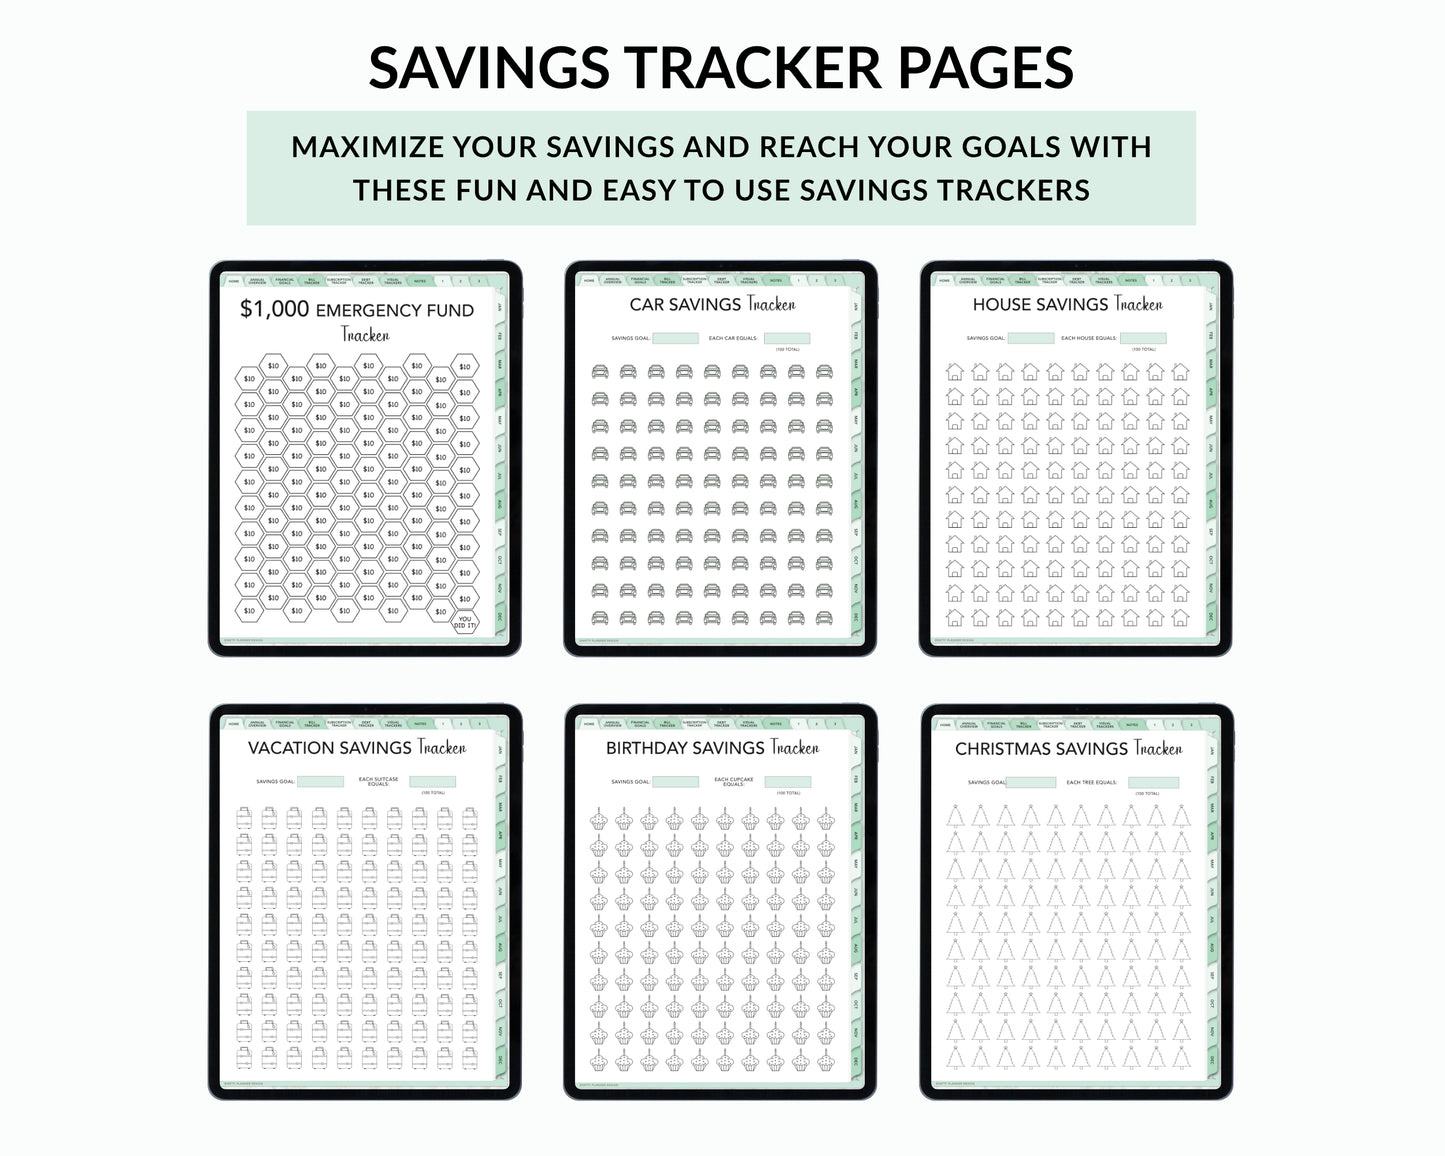 Digital Budget Planner for iPad and Tablets - Mint-Green